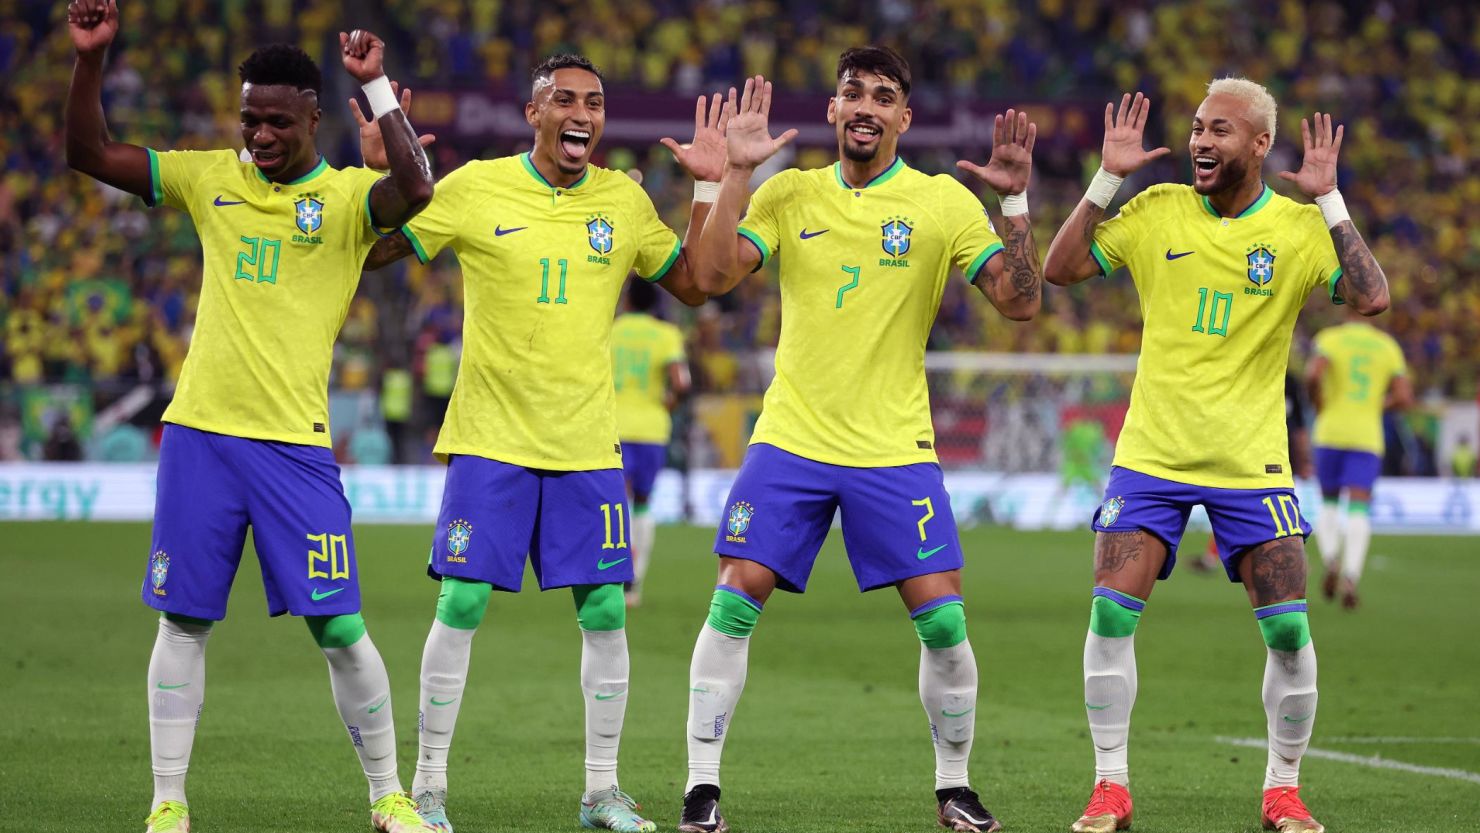 Brazil dances its way into World Cup quarterfinals thanks to